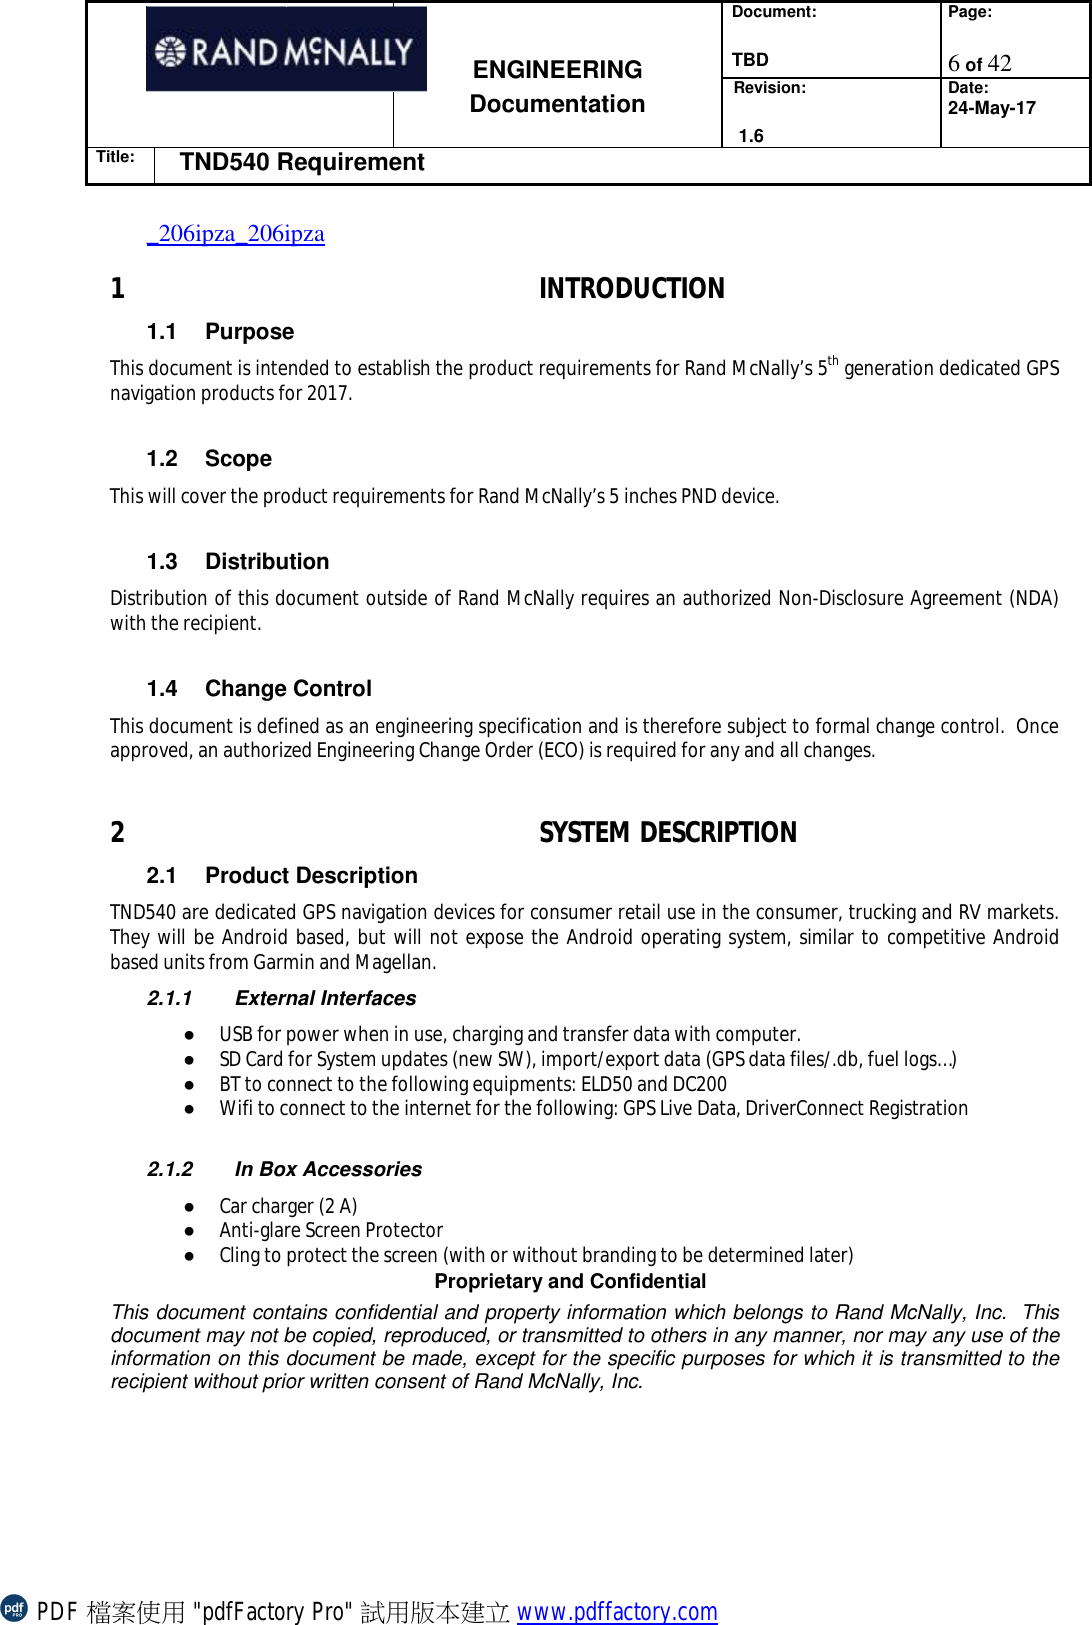 Document:  TBD Page:  6 of 42   ENGINEERING Documentation Revision:   1.6 Date: 24-May-17 Title: TND540 Requirement  Proprietary and Confidential This document contains confidential and property information which belongs to Rand McNally, Inc.  This document may not be copied, reproduced, or transmitted to others in any manner, nor may any use of the information on this document be made, except for the specific purposes for which it is transmitted to the recipient without prior written consent of Rand McNally, Inc.   _206ipza_206ipza1 INTRODUCTION 1.1 Purpose This document is intended to establish the product requirements for Rand McNally’s 5th generation dedicated GPS navigation products for 2017.  1.2 Scope This will cover the product requirements for Rand McNally’s 5 inches PND device.  1.3 Distribution Distribution of this document outside of Rand McNally requires an authorized Non-Disclosure Agreement (NDA) with the recipient.  1.4 Change Control This document is defined as an engineering specification and is therefore subject to formal change control.  Once approved, an authorized Engineering Change Order (ECO) is required for any and all changes.  2 SYSTEM DESCRIPTION 2.1 Product Description TND540 are dedicated GPS navigation devices for consumer retail use in the consumer, trucking and RV markets.  They will be Android based, but will not expose the Android operating system, similar to competitive Android based units from Garmin and Magellan. 2.1.1 External Interfaces ● USB for power when in use, charging and transfer data with computer. ● SD Card for System updates (new SW), import/export data (GPS data files/.db, fuel logs…) ● BT to connect to the following equipments: ELD50 and DC200 ● Wifi to connect to the internet for the following: GPS Live Data, DriverConnect Registration  2.1.2 In Box Accessories ● Car charger (2 A) ● Anti-glare Screen Protector ● Cling to protect the screen (with or without branding to be determined later) PDF 檔案使用 &quot;pdfFactory Pro&quot; 試用版本建立 www.pdffactory.com